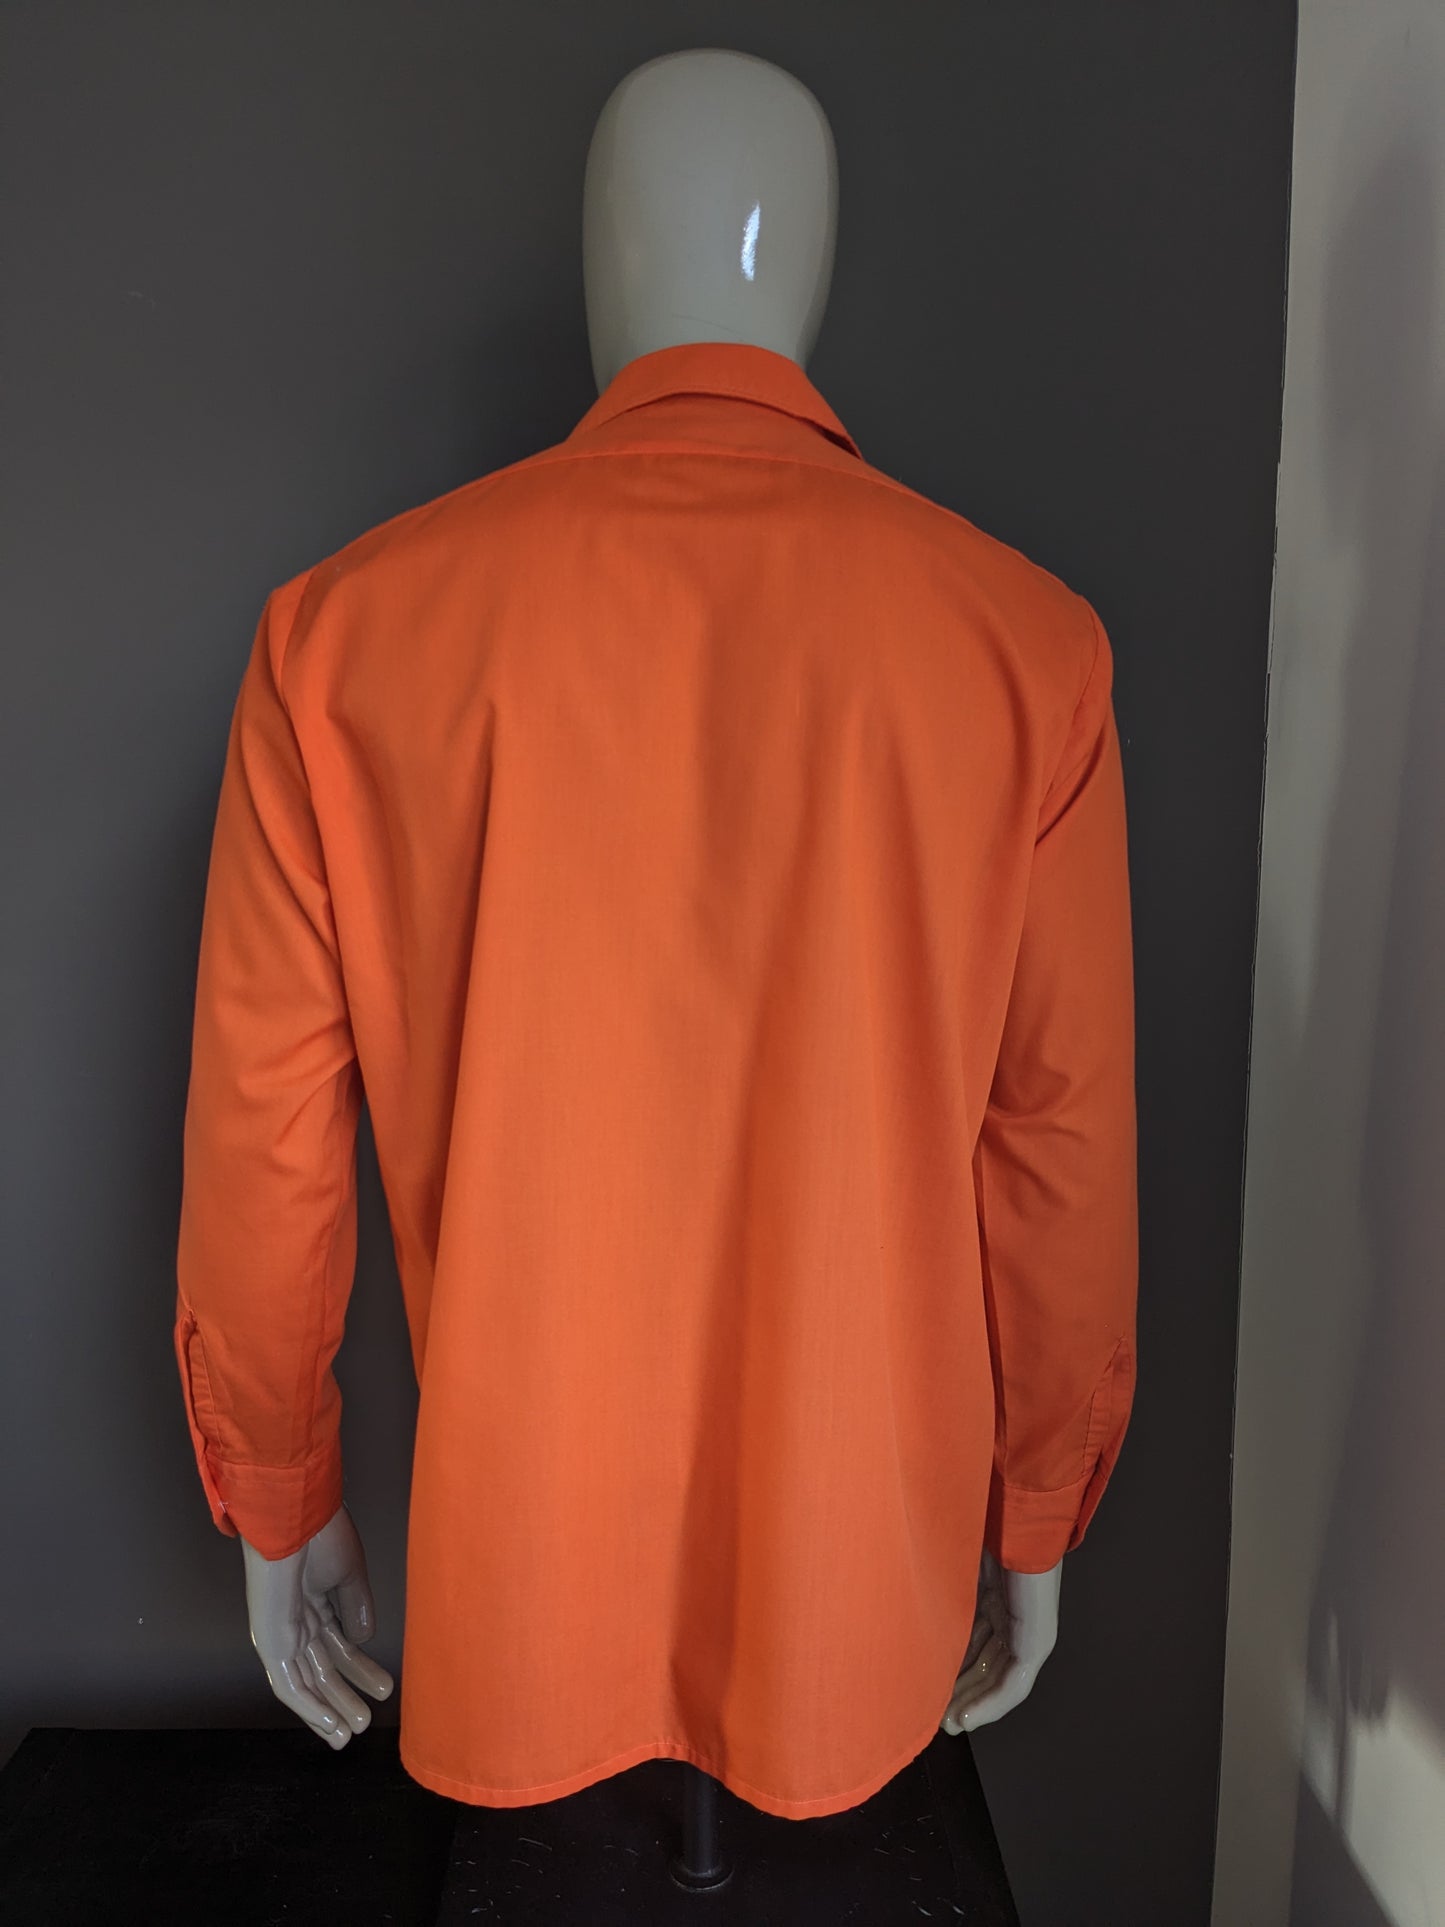 Vintage 70's Curo shirt with point collar. Orange colored. Size XL.